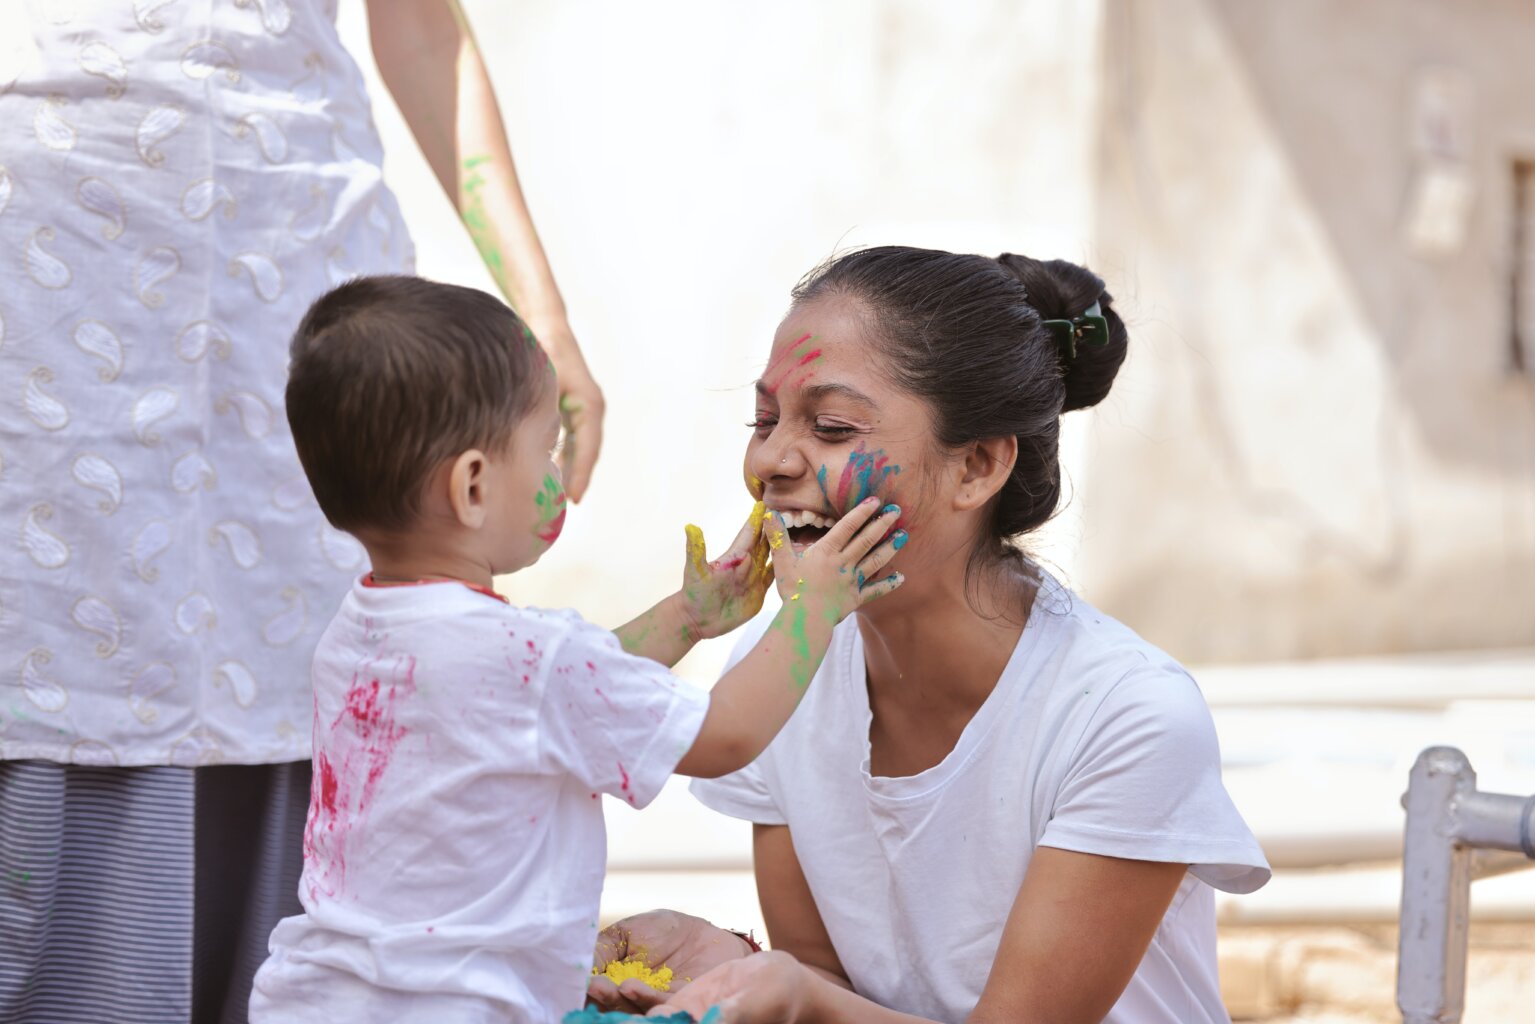 A mom and son who are both covered in paint while the toddler holds his mom’s cheeks.